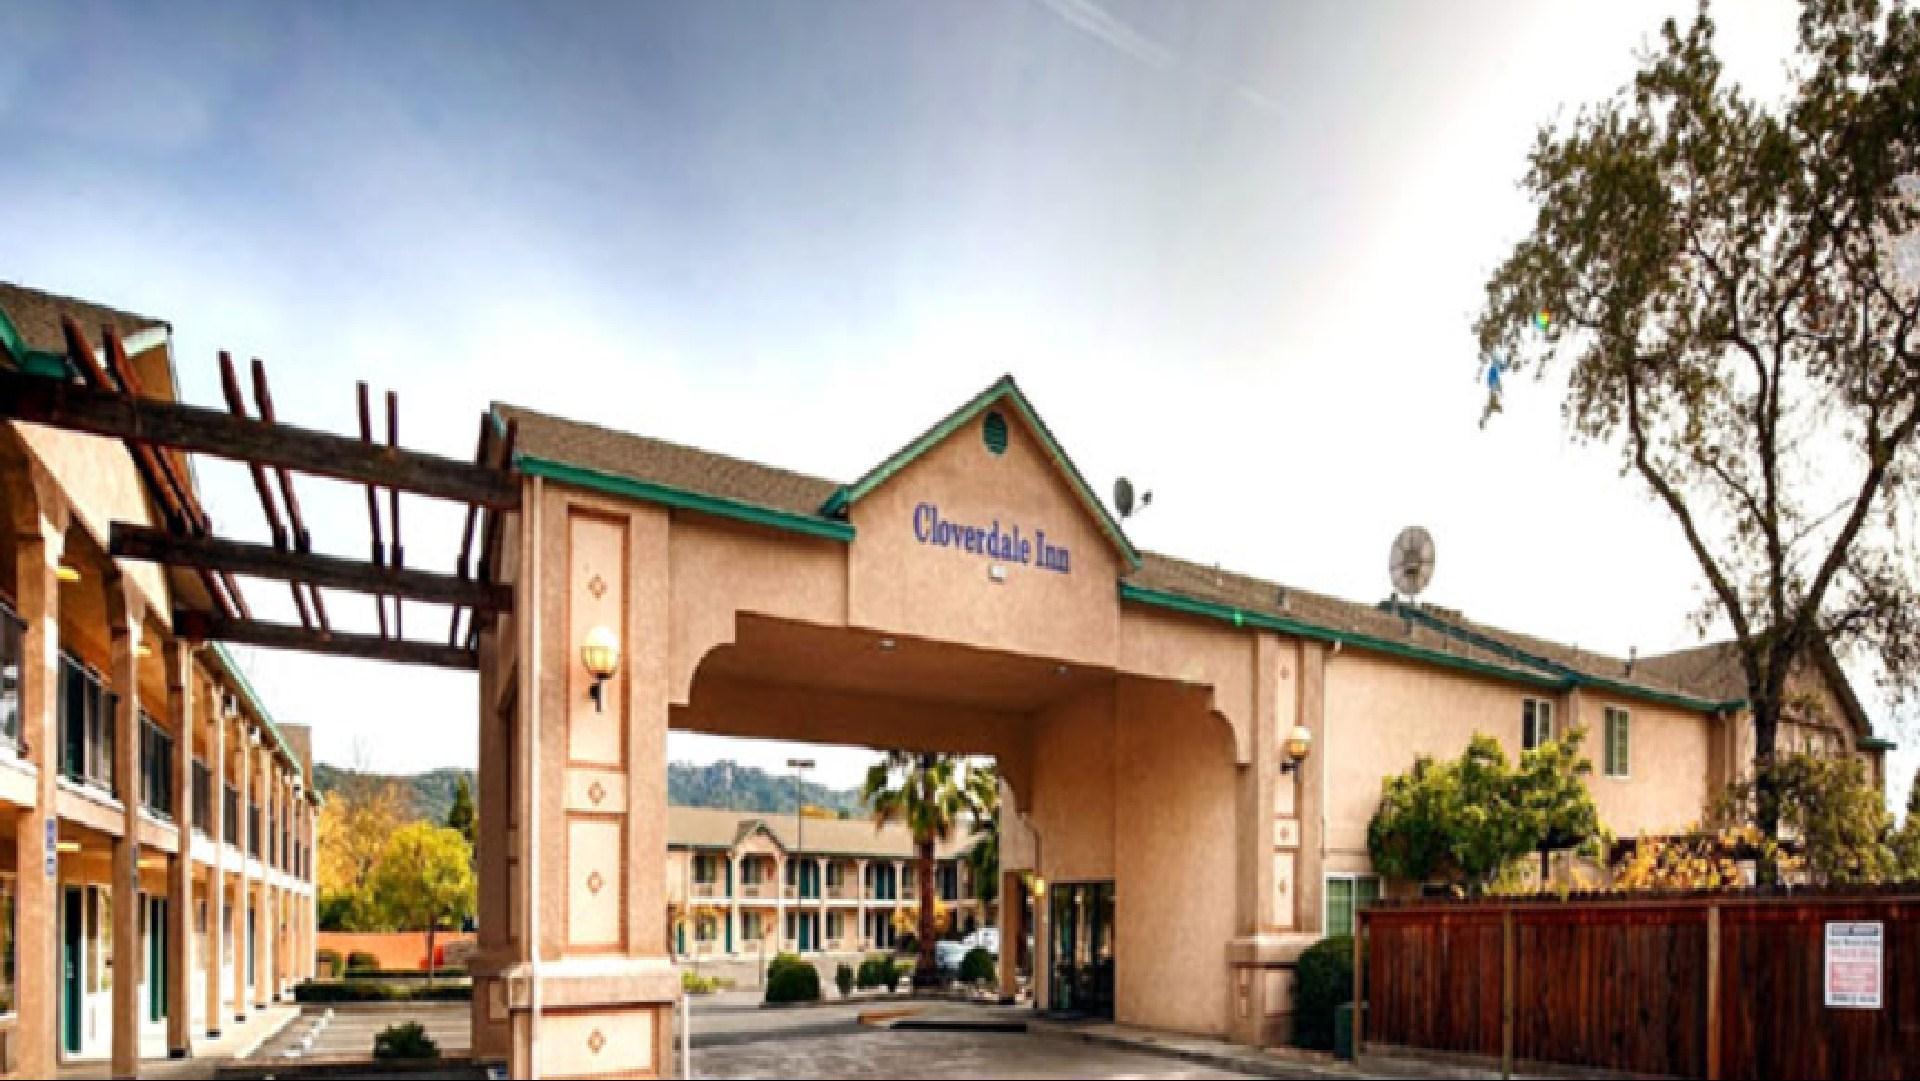 Cloverdale Wine Country Inn and Suites in Cloverdale, CA